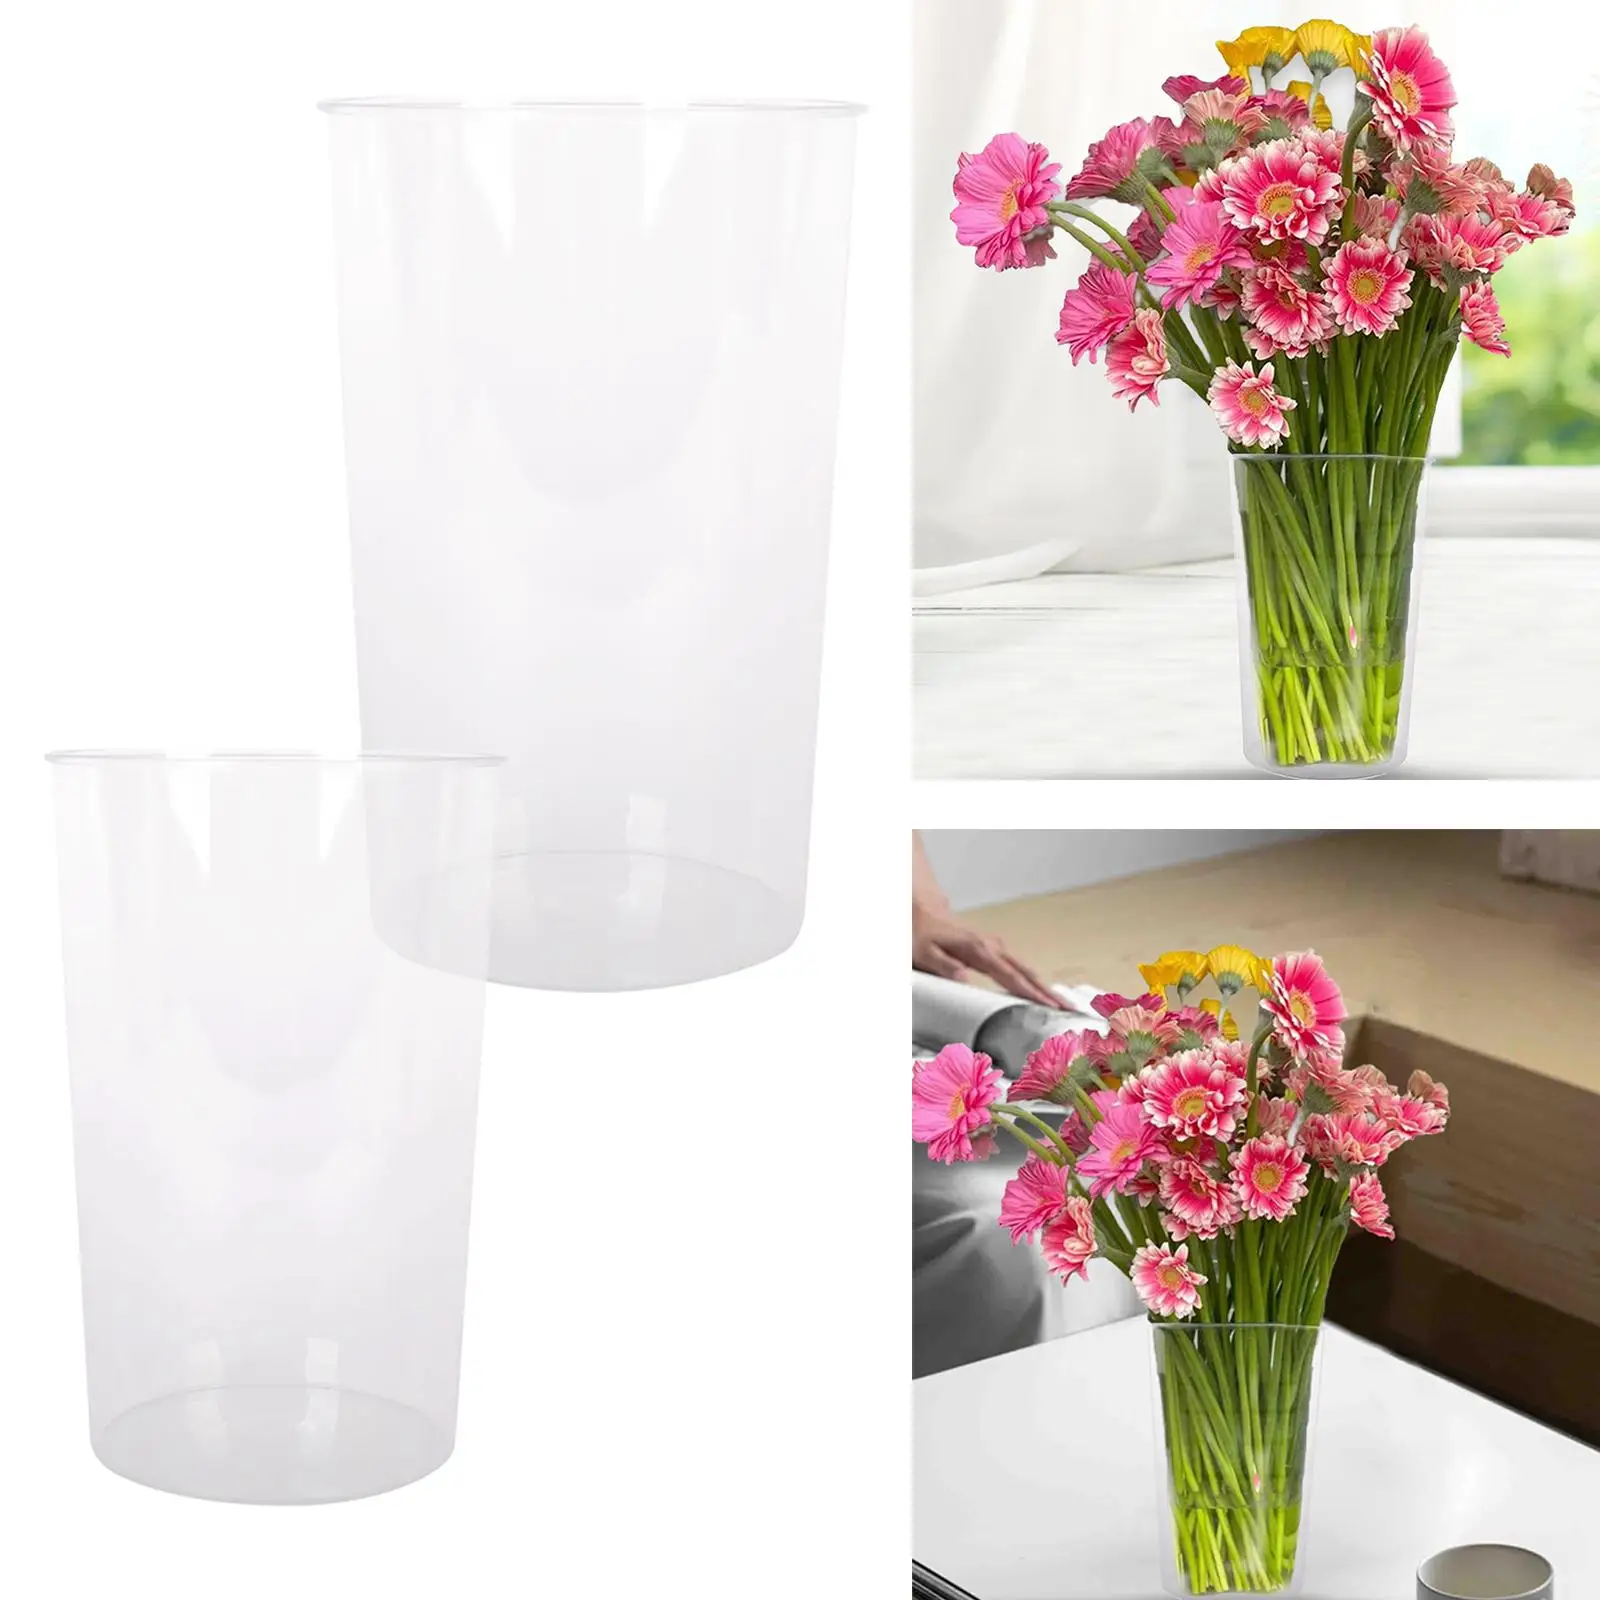 Acrylic Flower Vase Round Aesthetic Lightweight Classy Hydroponic Plant Container for Living Room Apartment Anniversary Desk